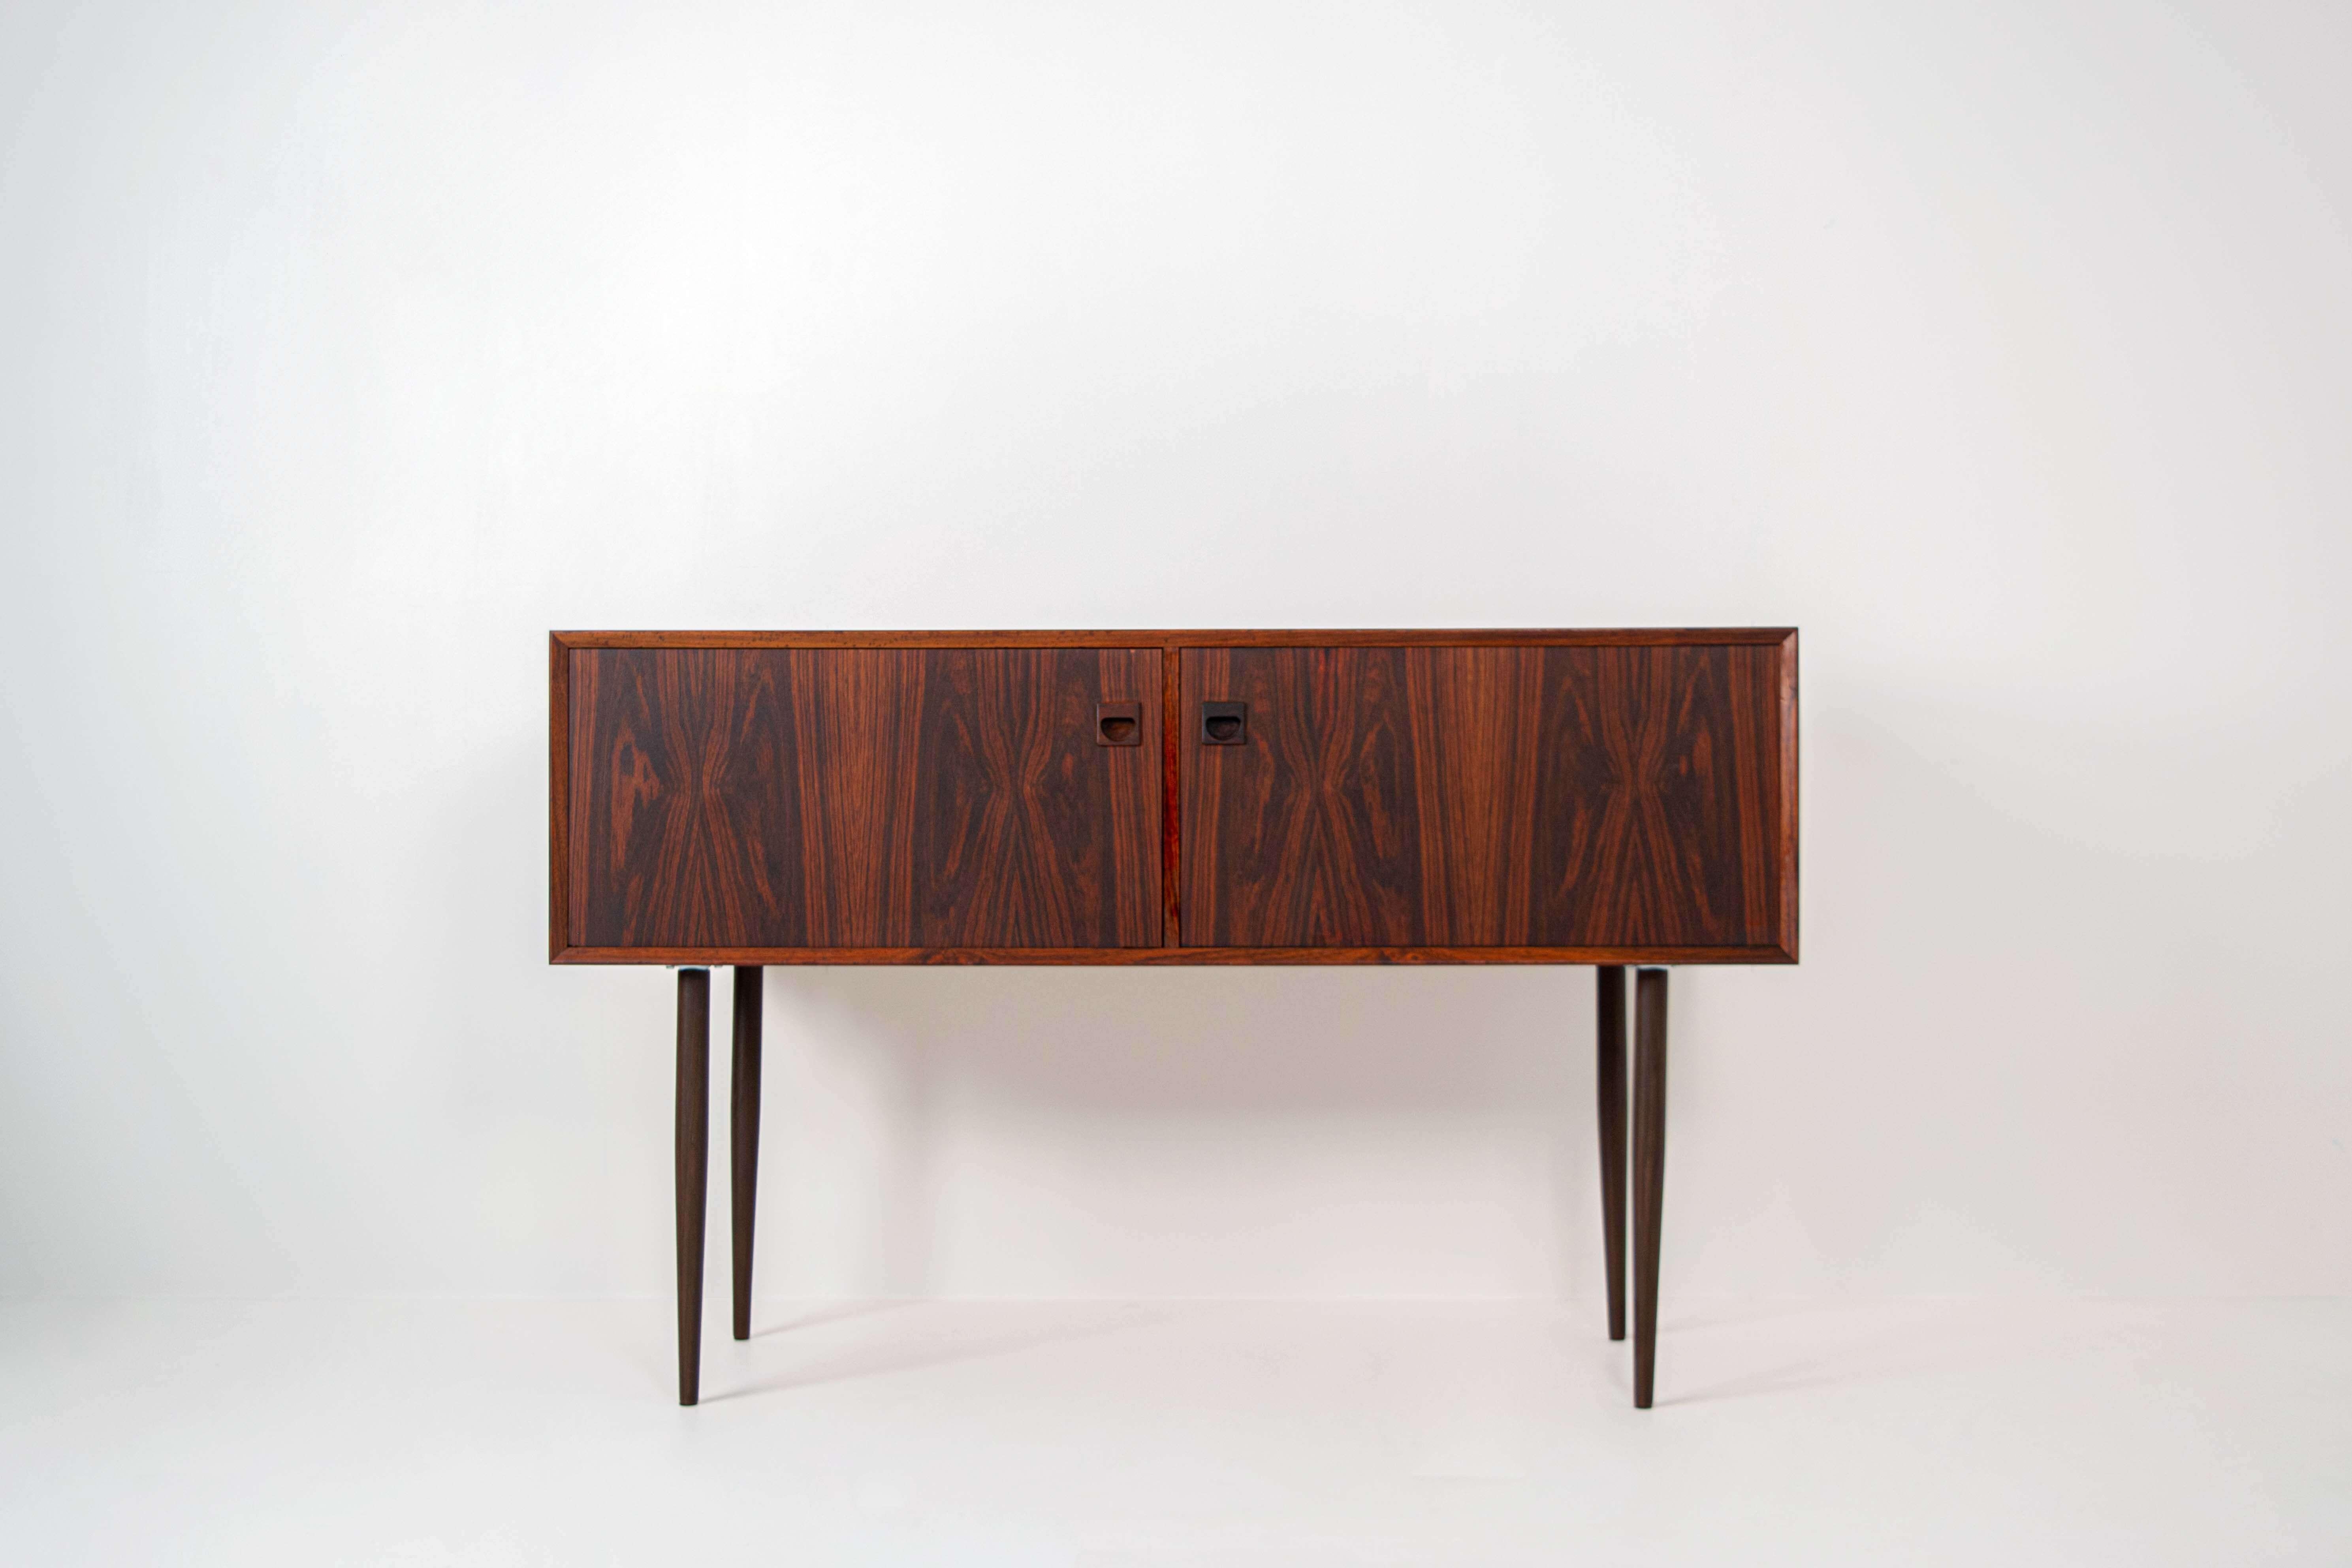 Vintage Danish sideboard in rosewood veneer by Brouer Møbelfabrik, 1960s. This sideboard has two doors and four legs that are mounted at a later point. Alternatively, you can also mount the sideboard to the wall or let it rest on the floor. The